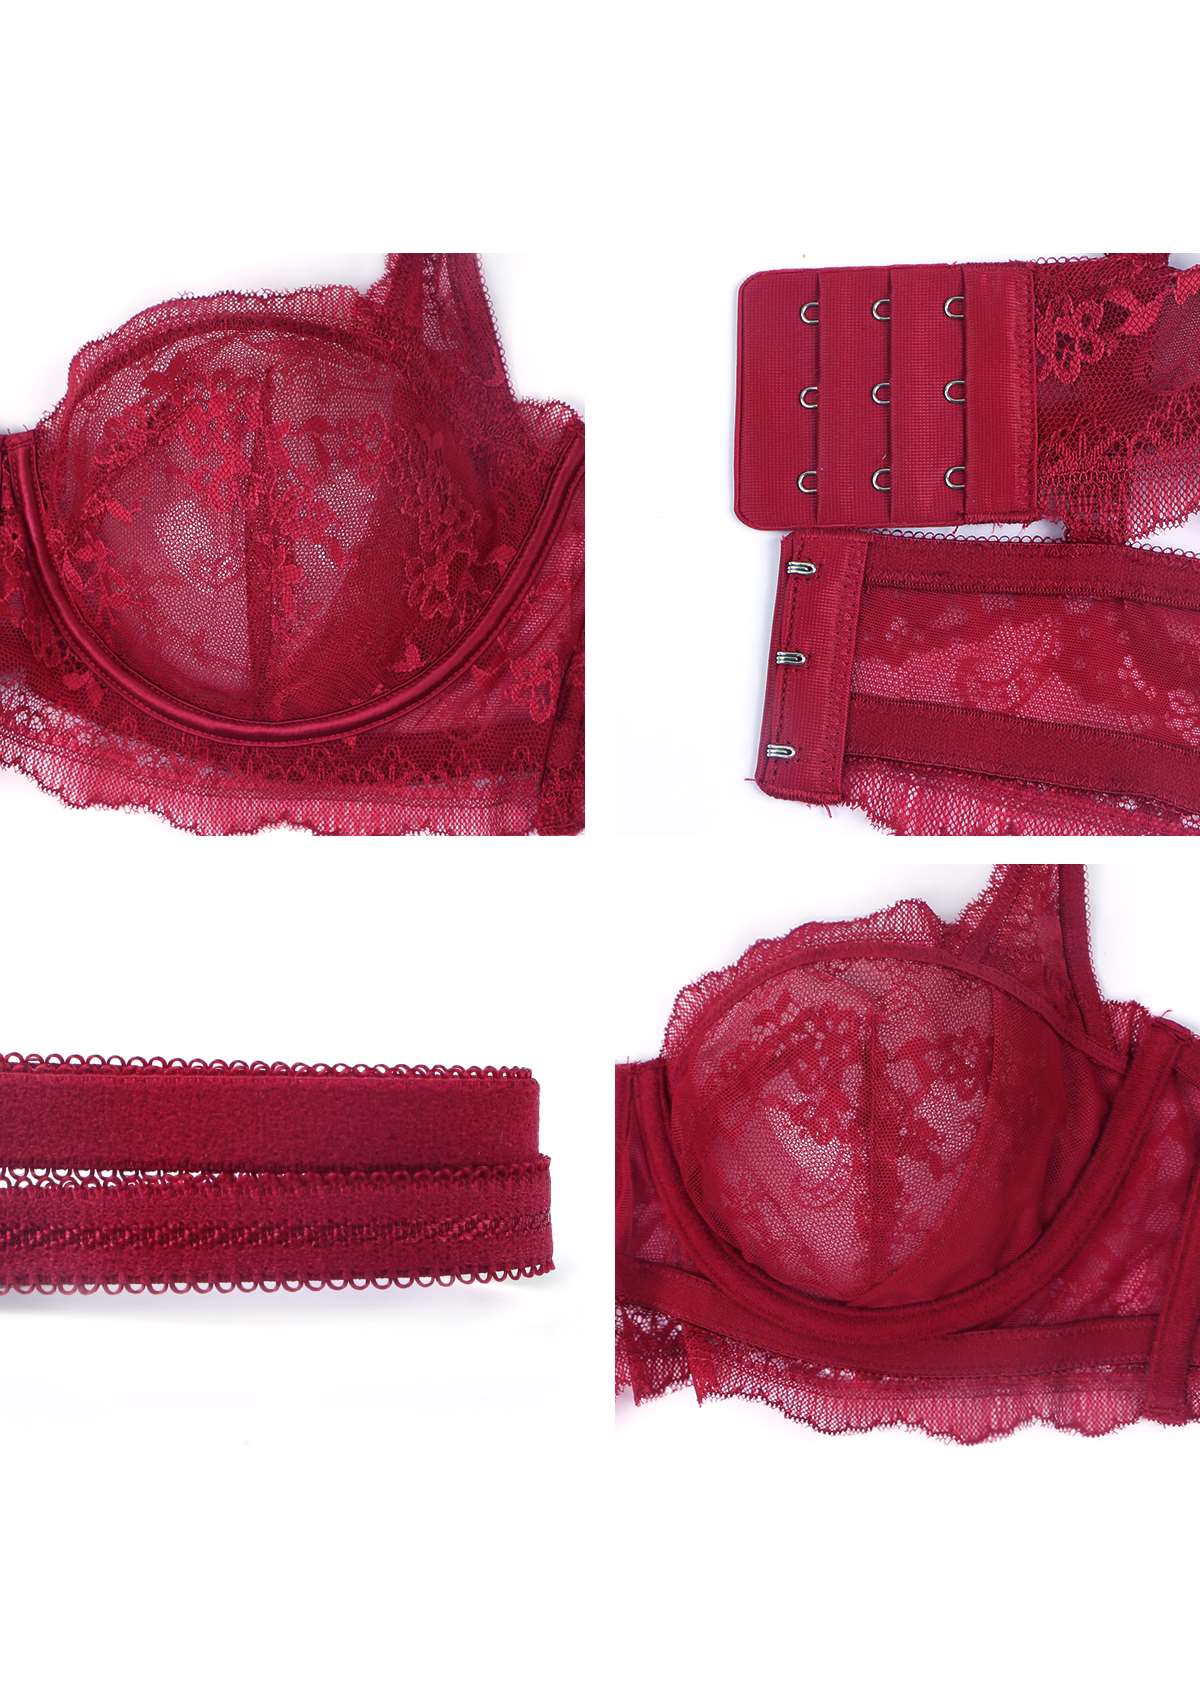 HSIA Floral Lace Unlined Bridal Balconette Bra Set - Supportive Classic - Burgundy / 34 / C